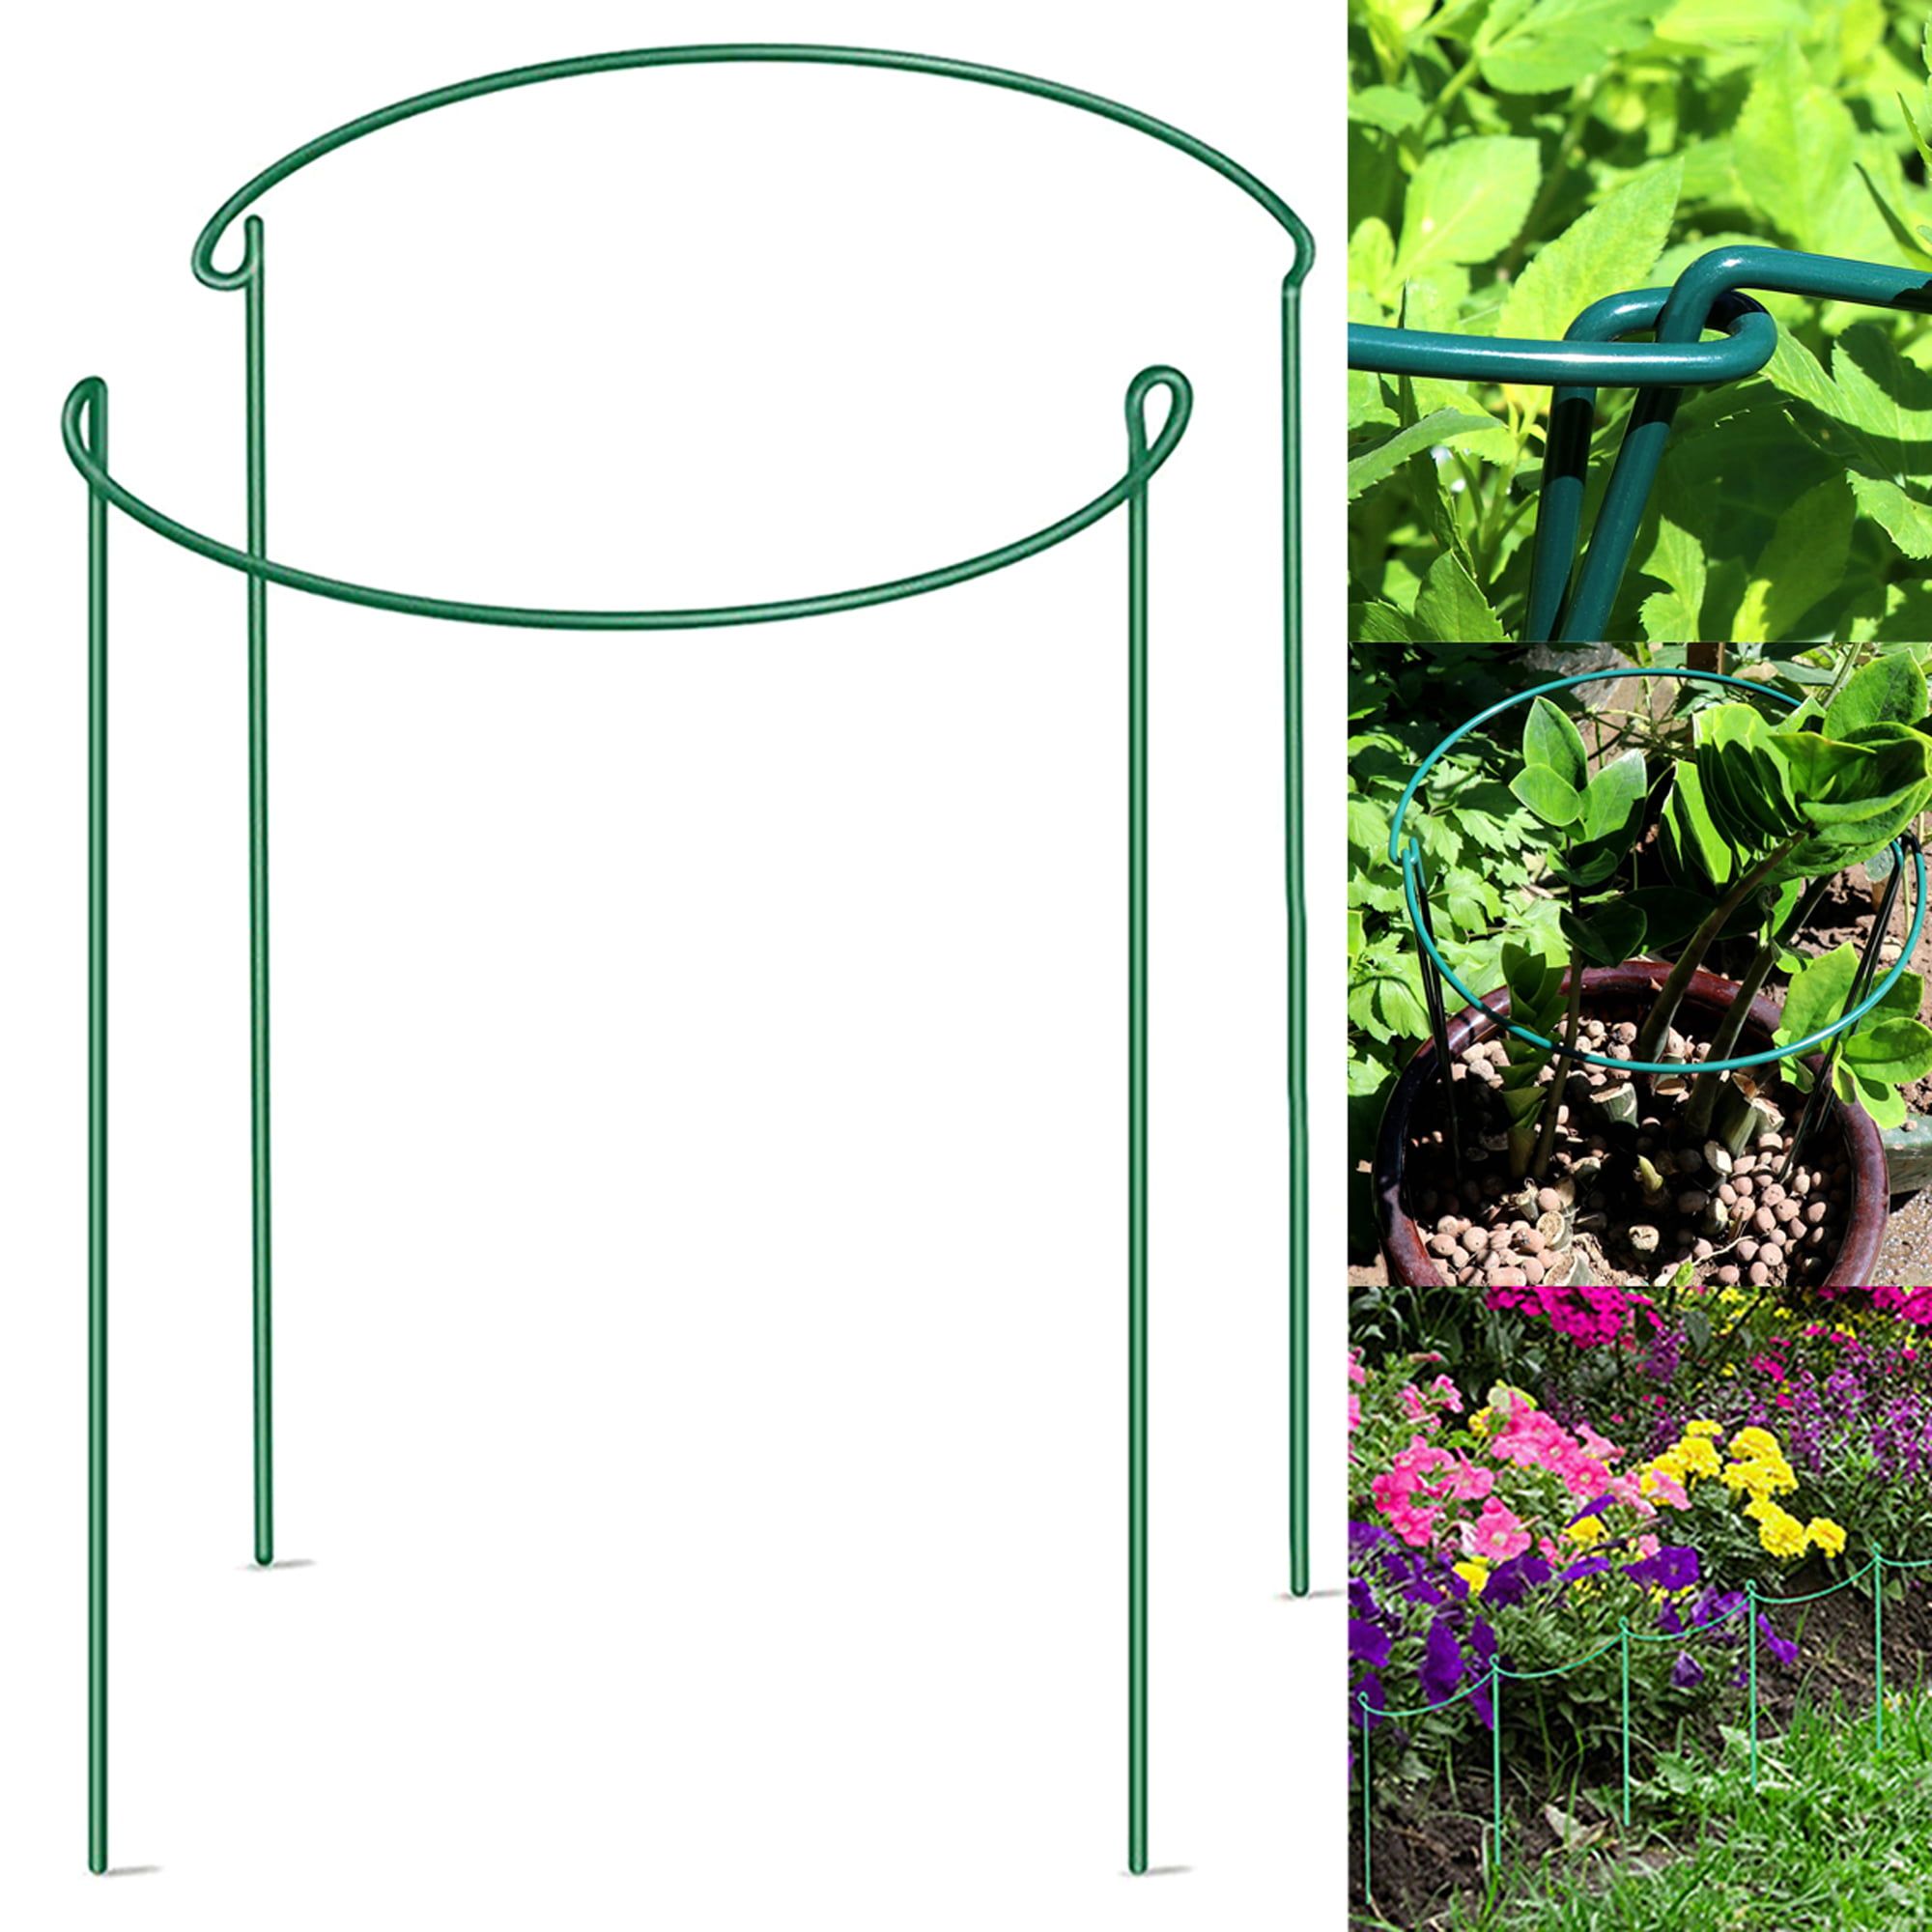 50 X 25cm Plant Support Rings for Garden Canes Flower Ties Ring Frame Pots Clip 